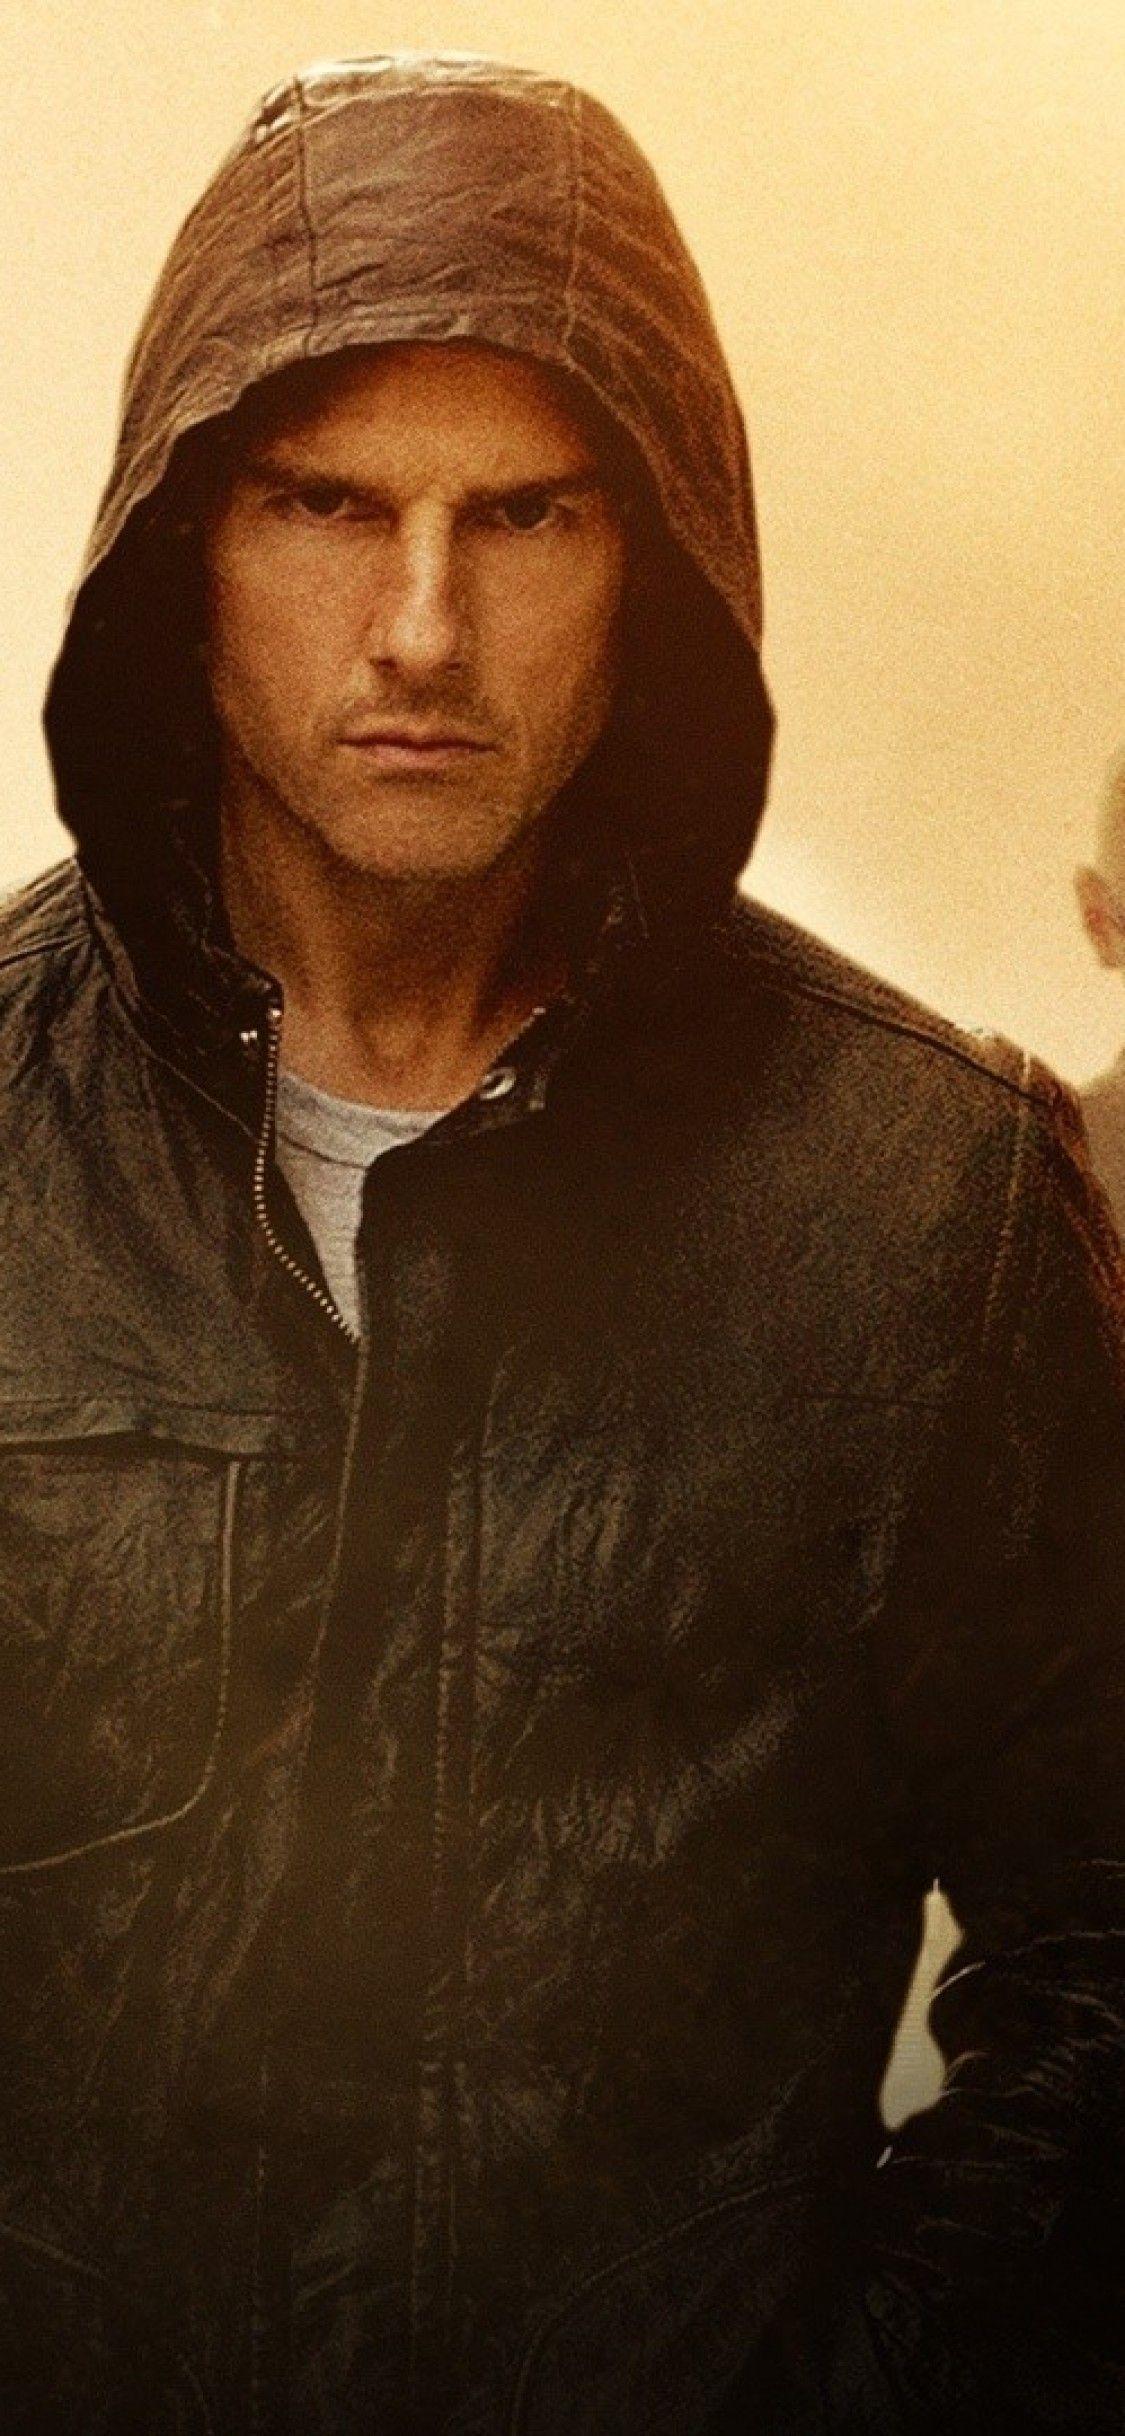 Tom Cruise Phone Wallpapers - Top Free Tom Cruise Phone Backgrounds ...